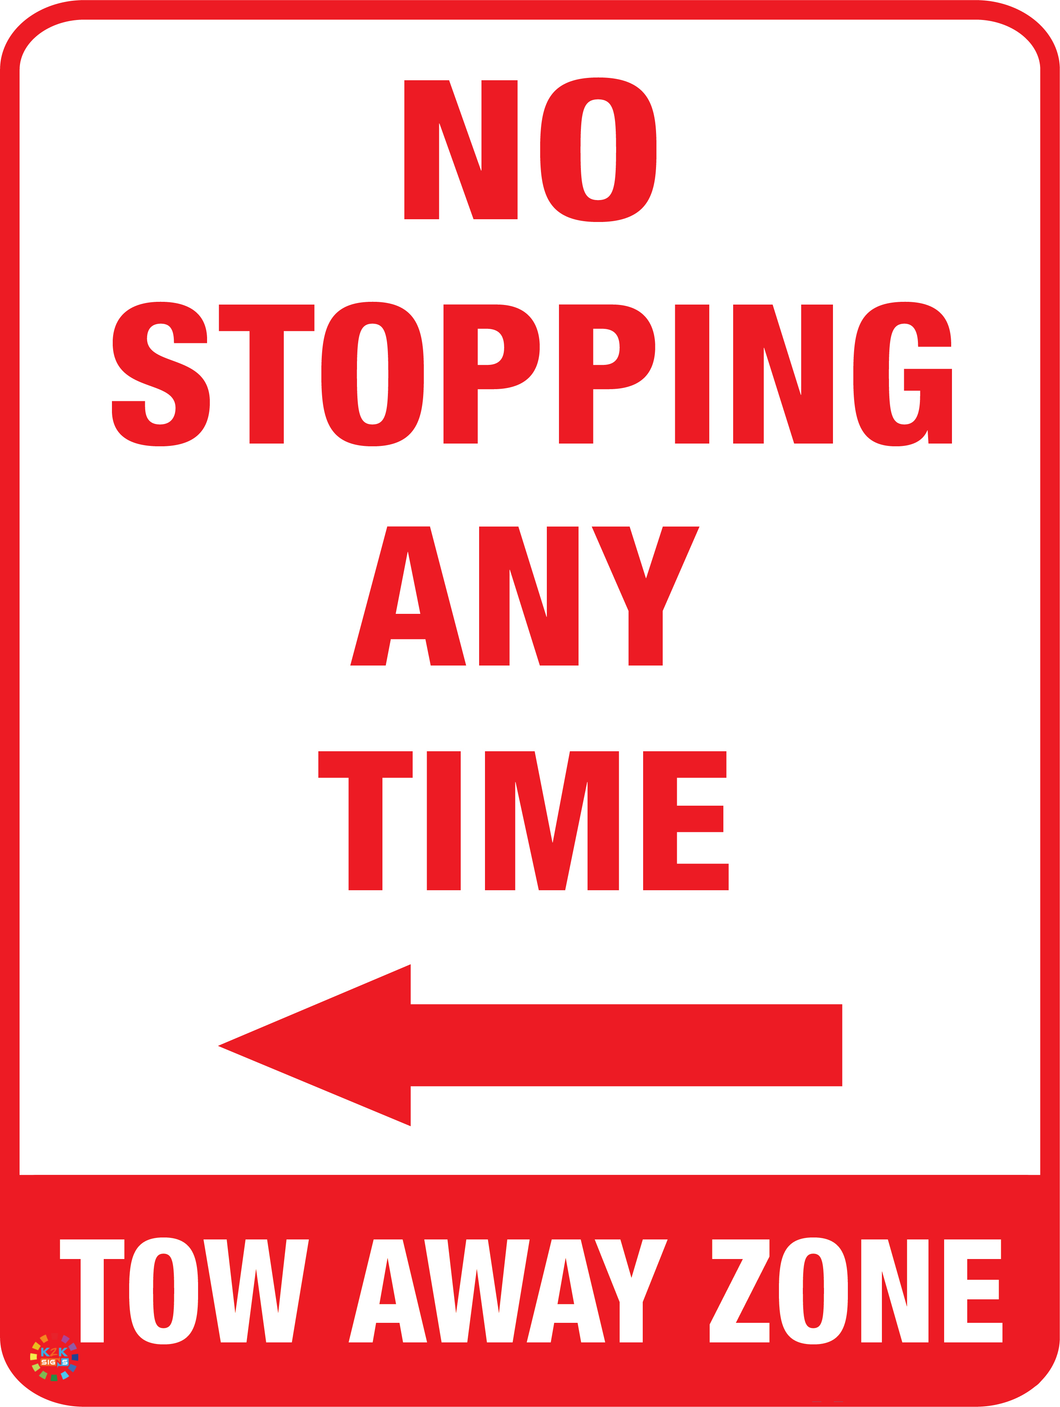 No Stopping Any Time Tow Away Zone (Left Arrow) Sign